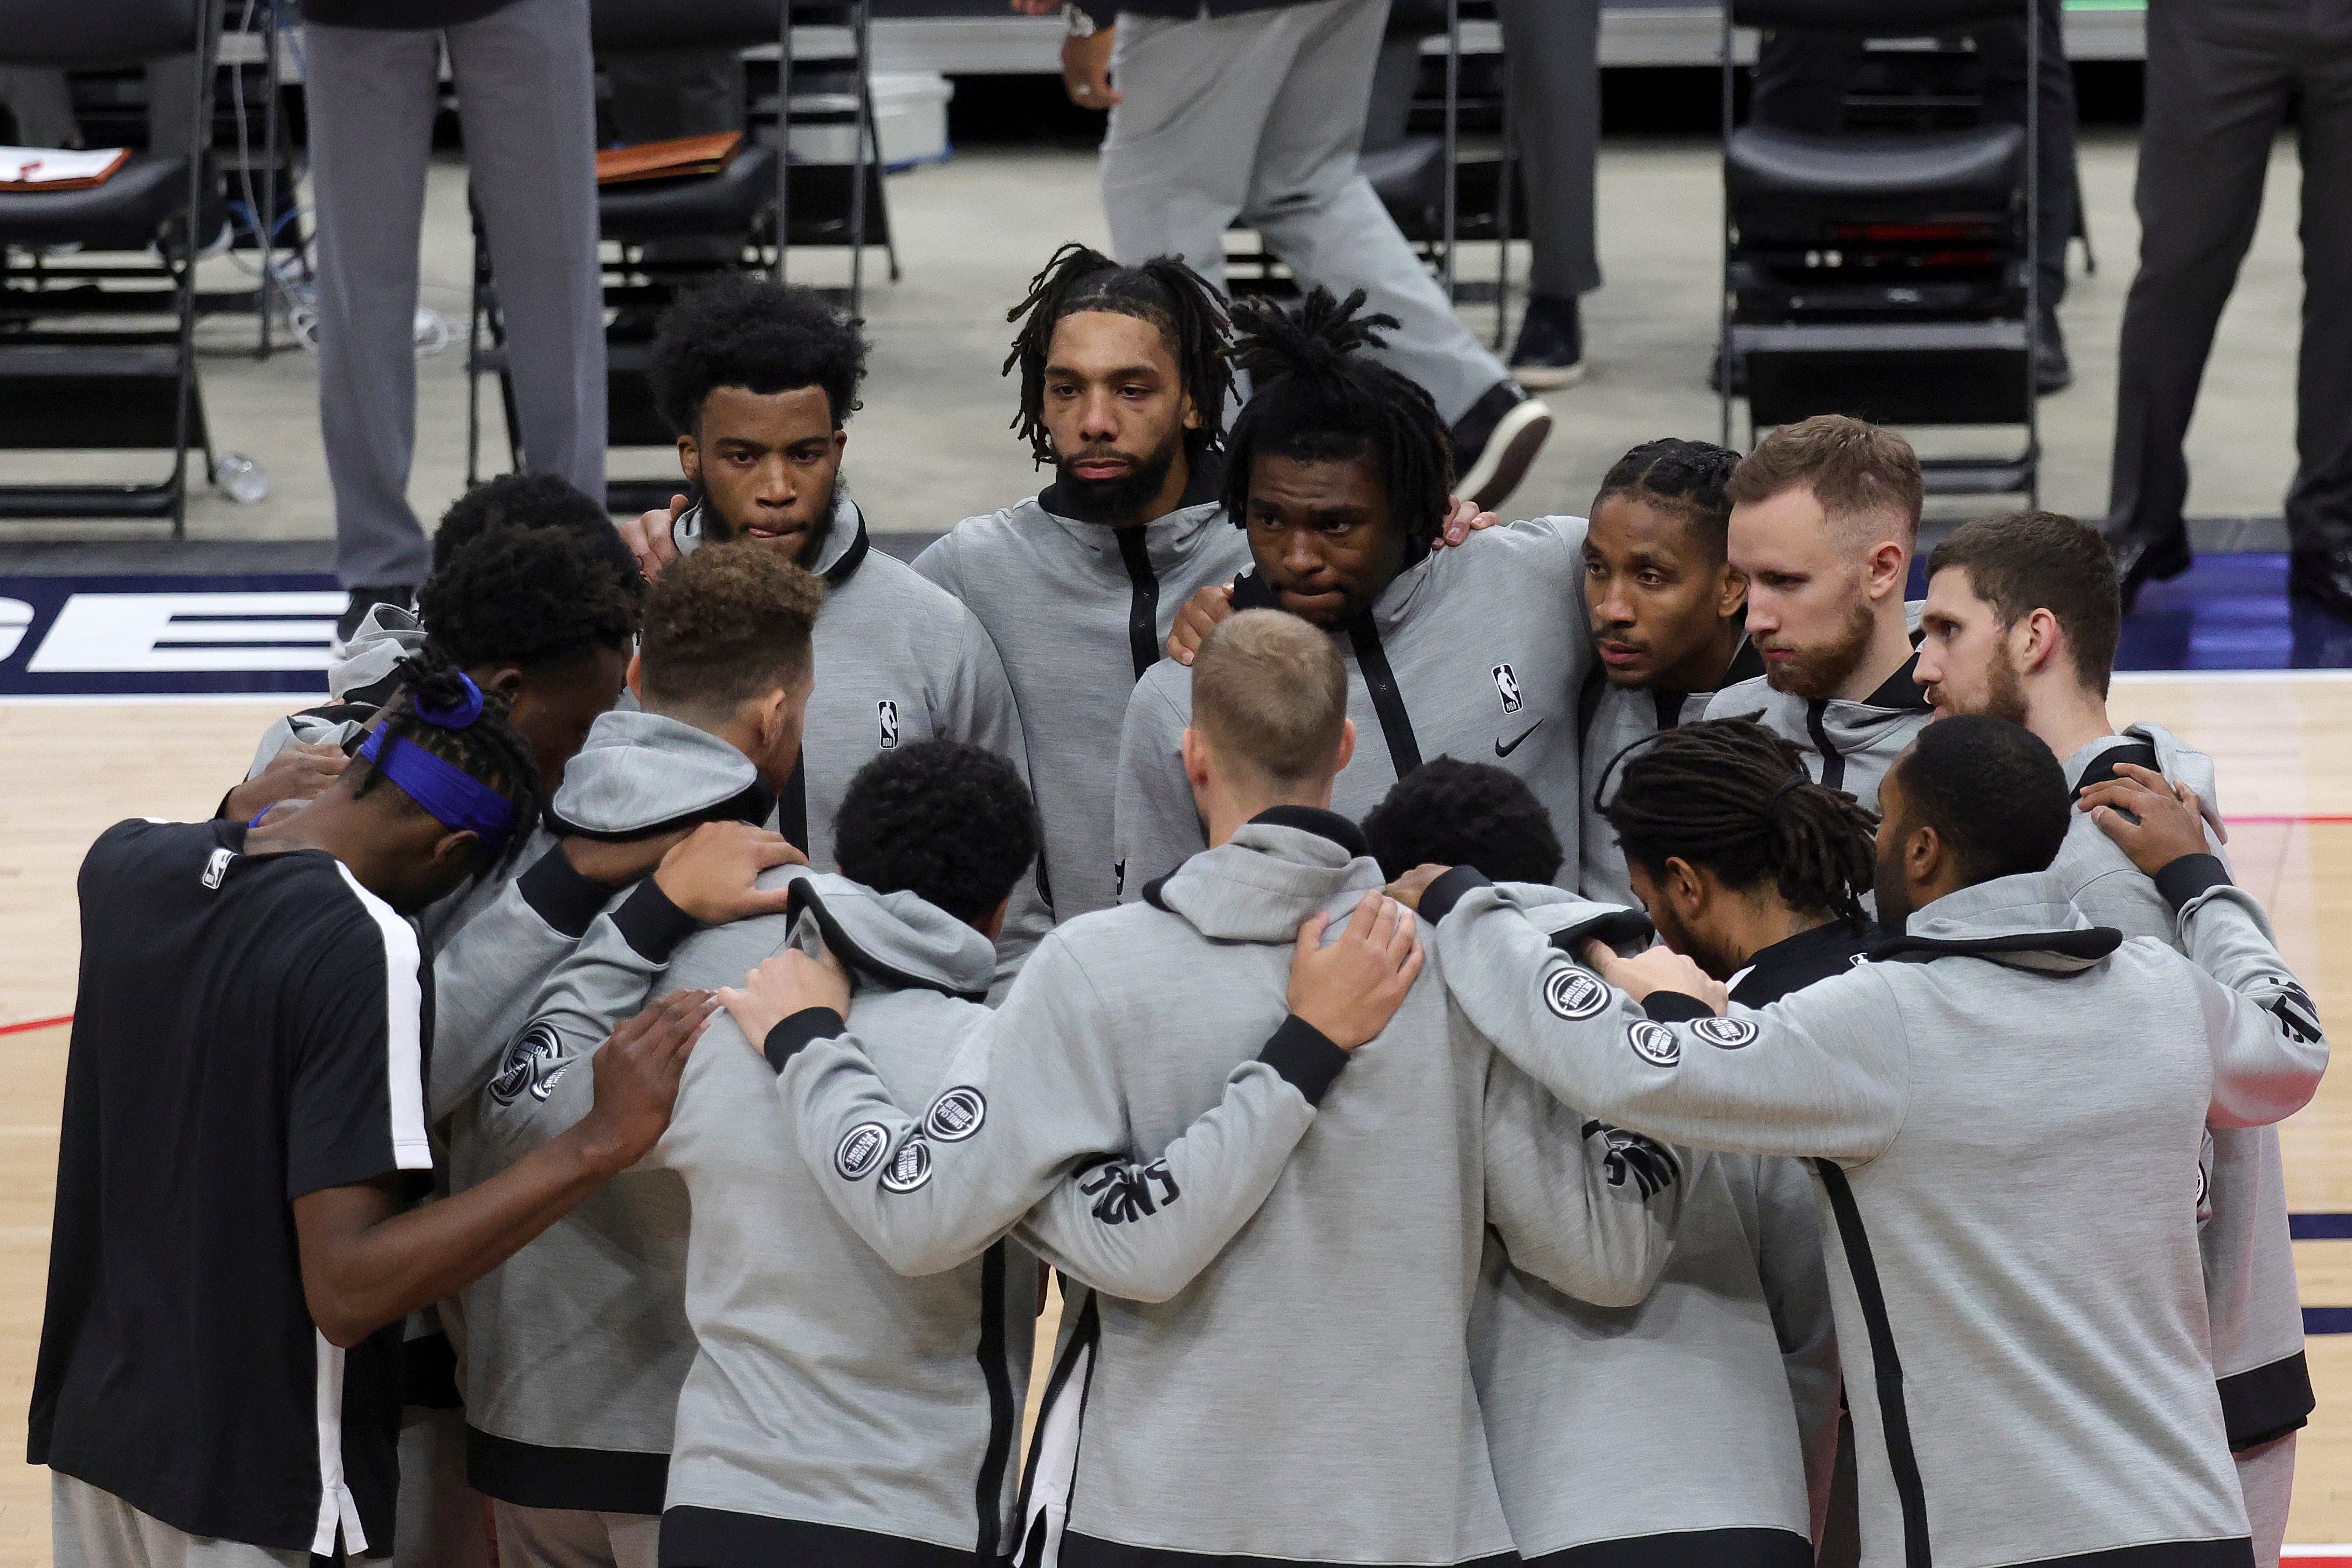 Members of the Detroit Pistons gather before the start a preseason NBA basketball game against the Washington Wizards, Saturday, Dec. 19, 2020 in Washington.